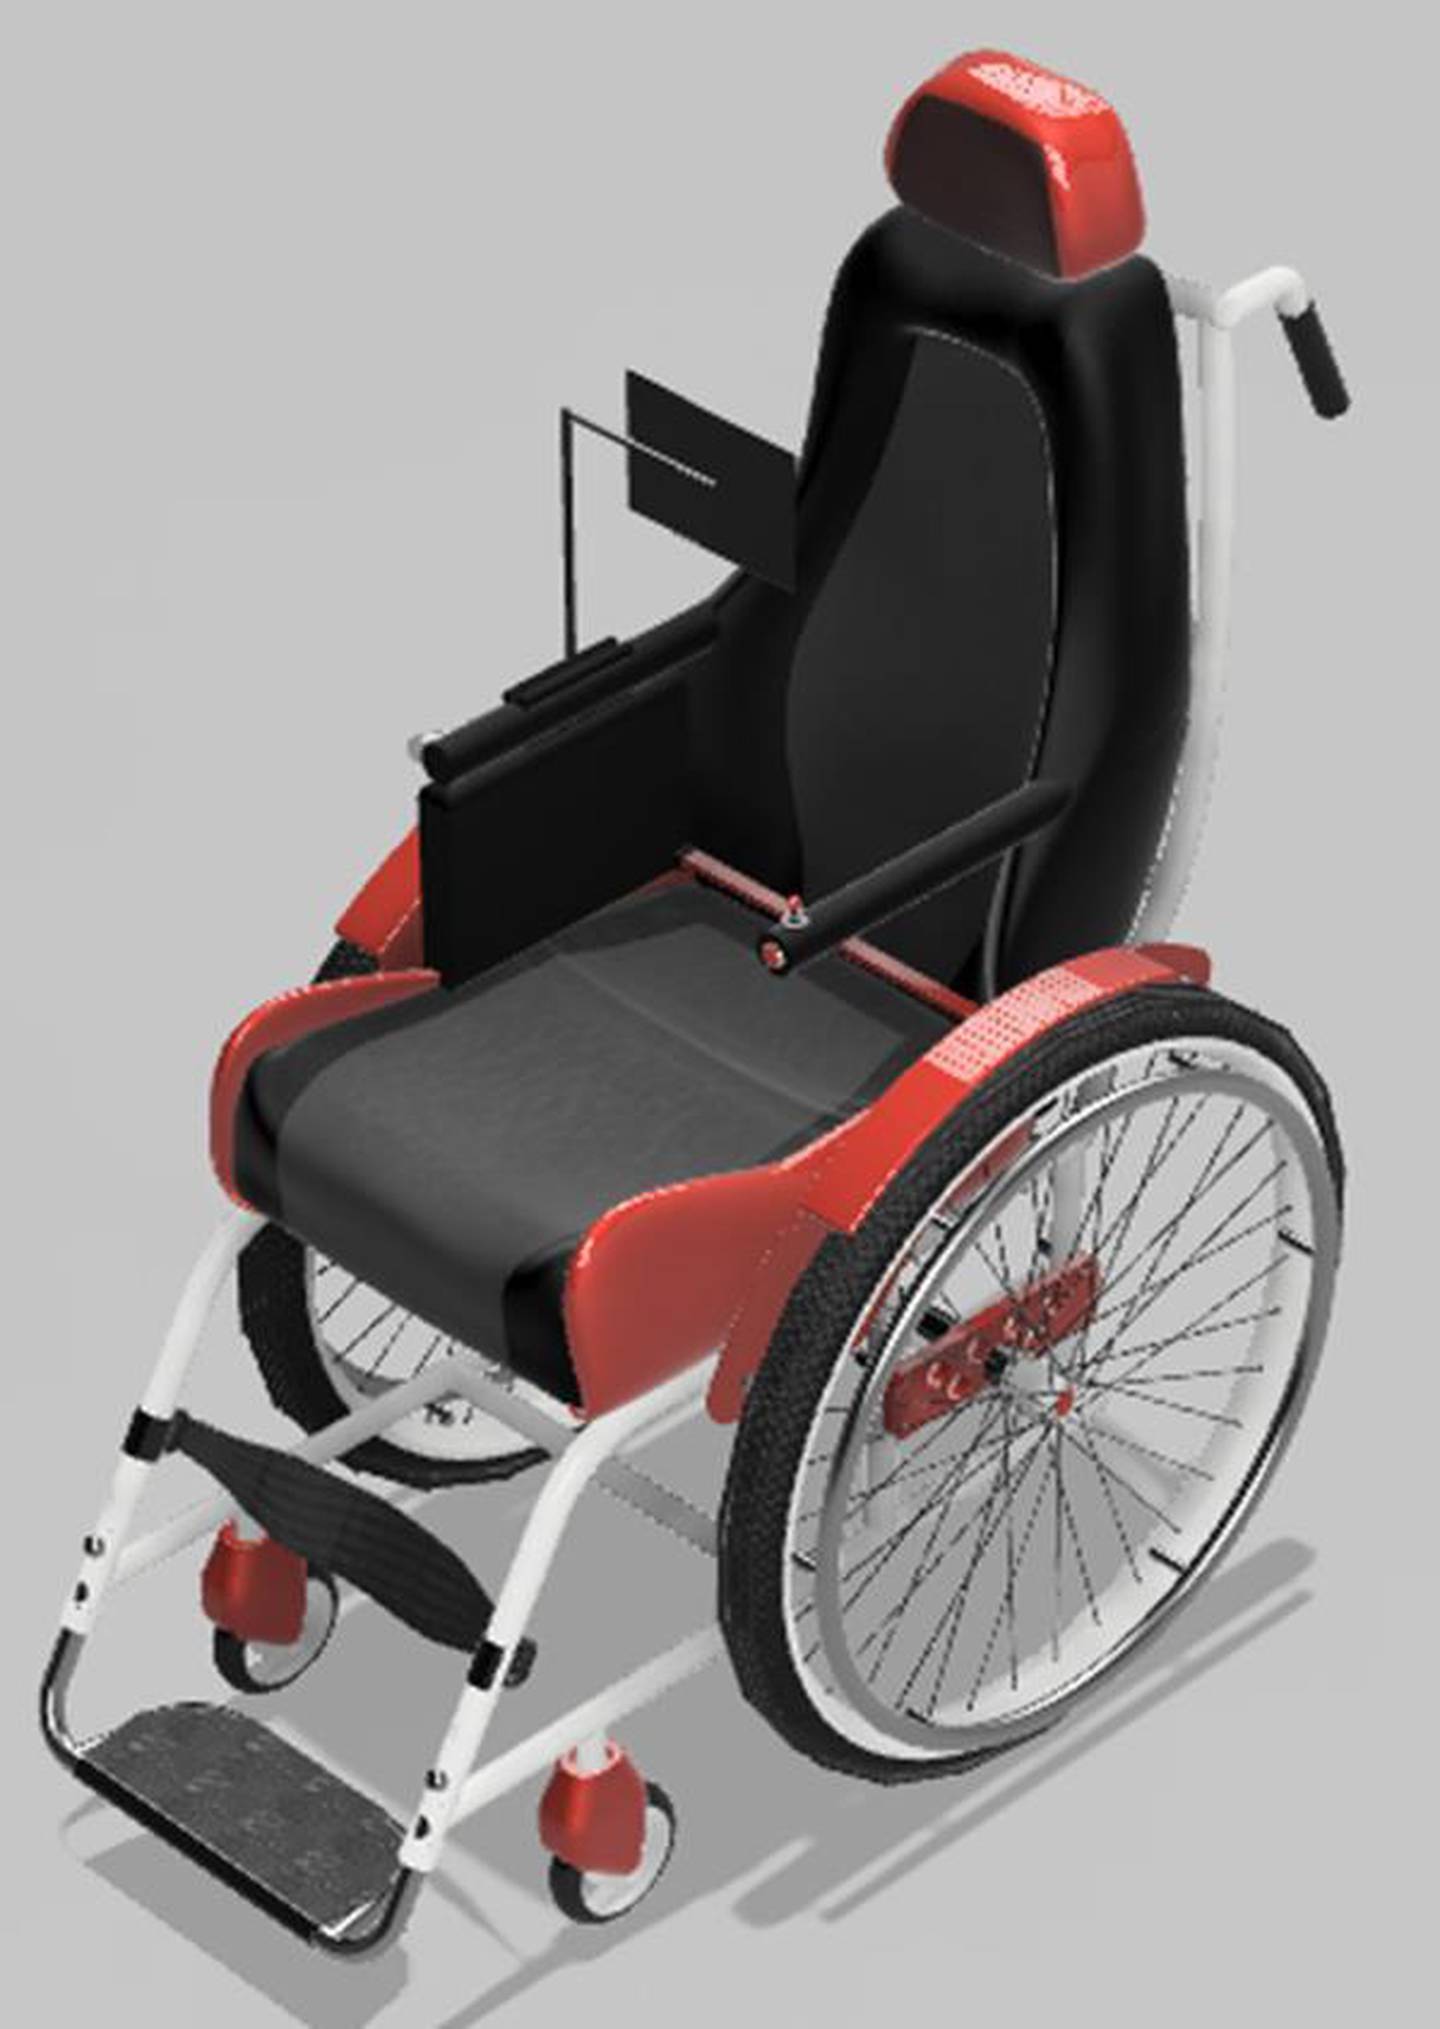 The wheelchair is still at the design stage. Photo: Gems Education